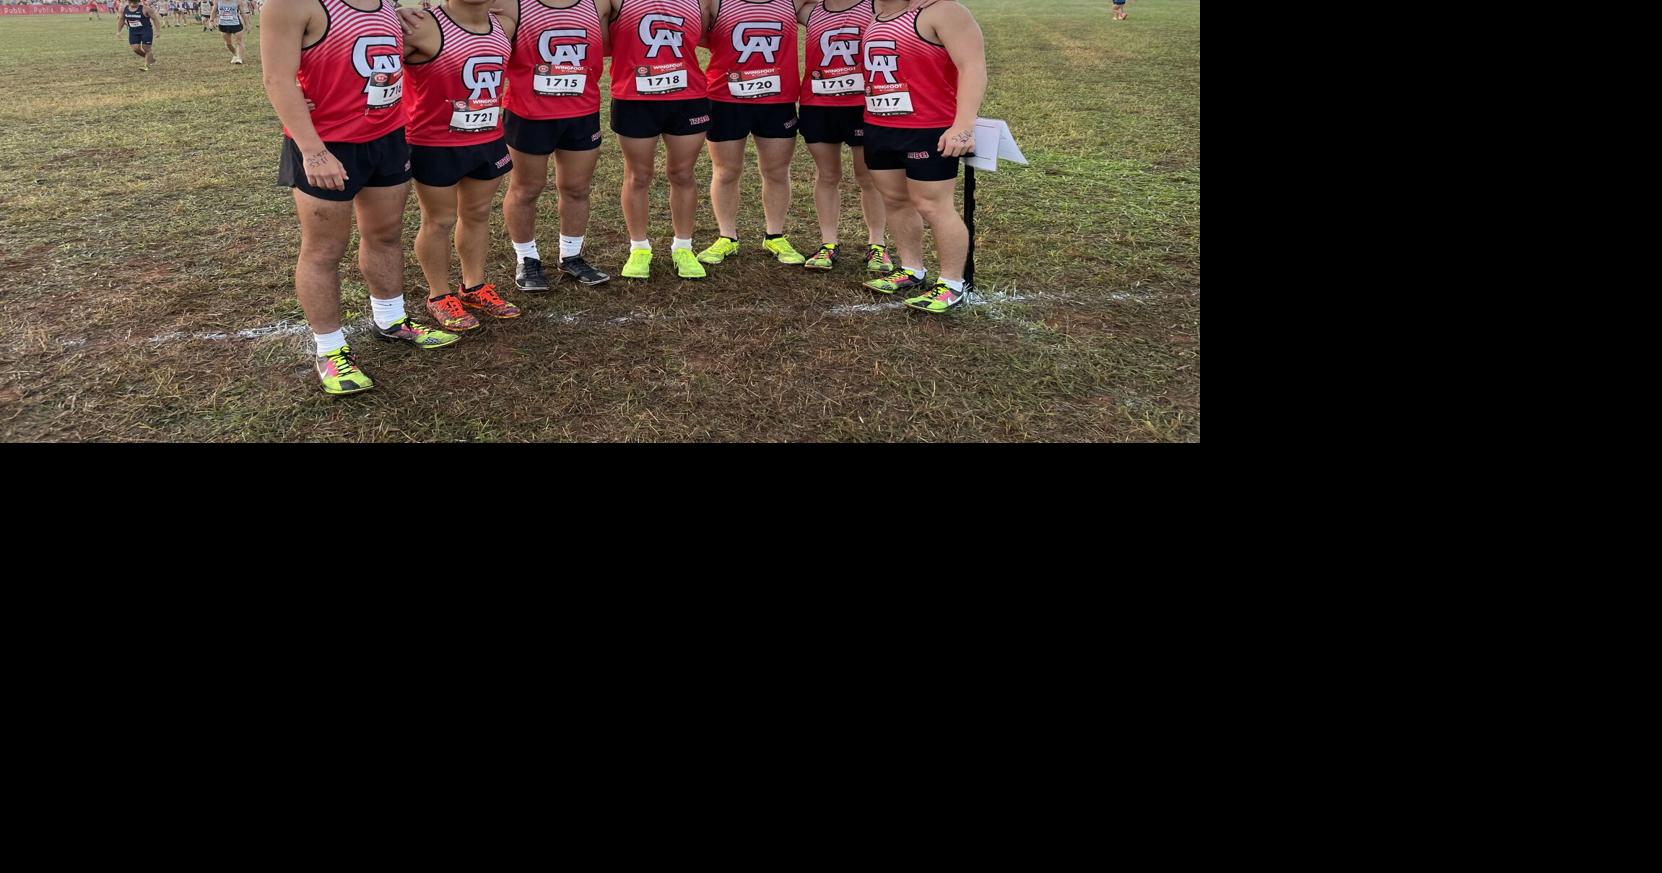 RUNNING AT WINGFOOT Glynn Academy cross country takes top 10 finishes